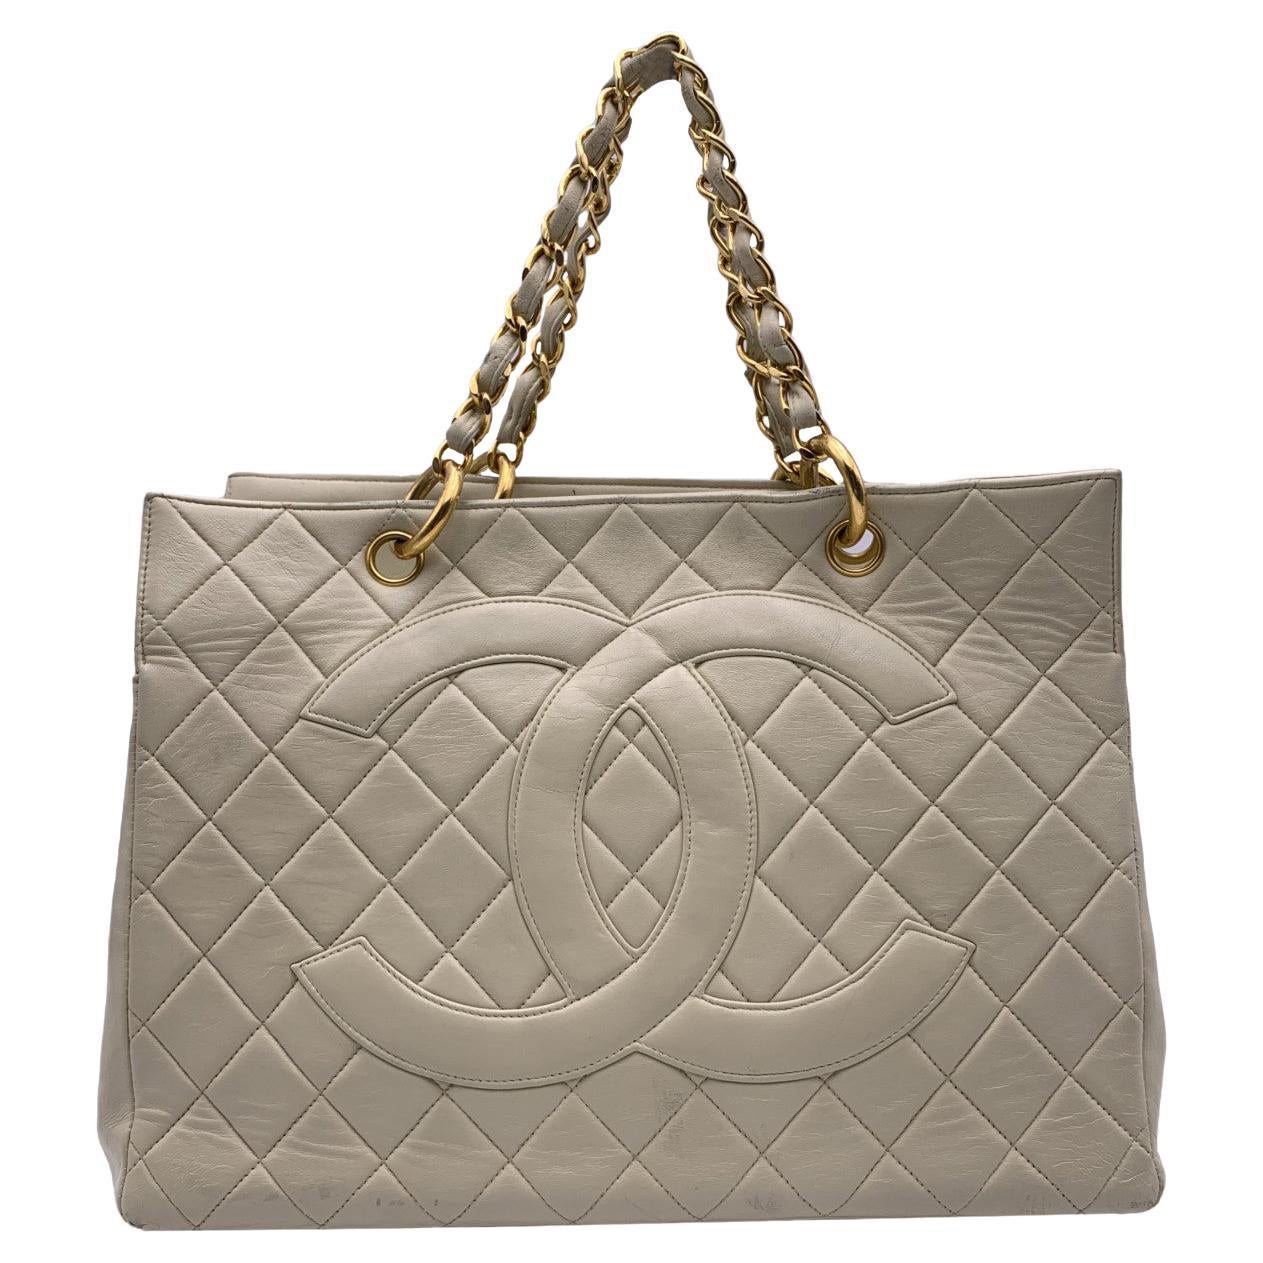 Chanel Vintage Beige Quilted Leather Grand Shopping Tote GST 1997